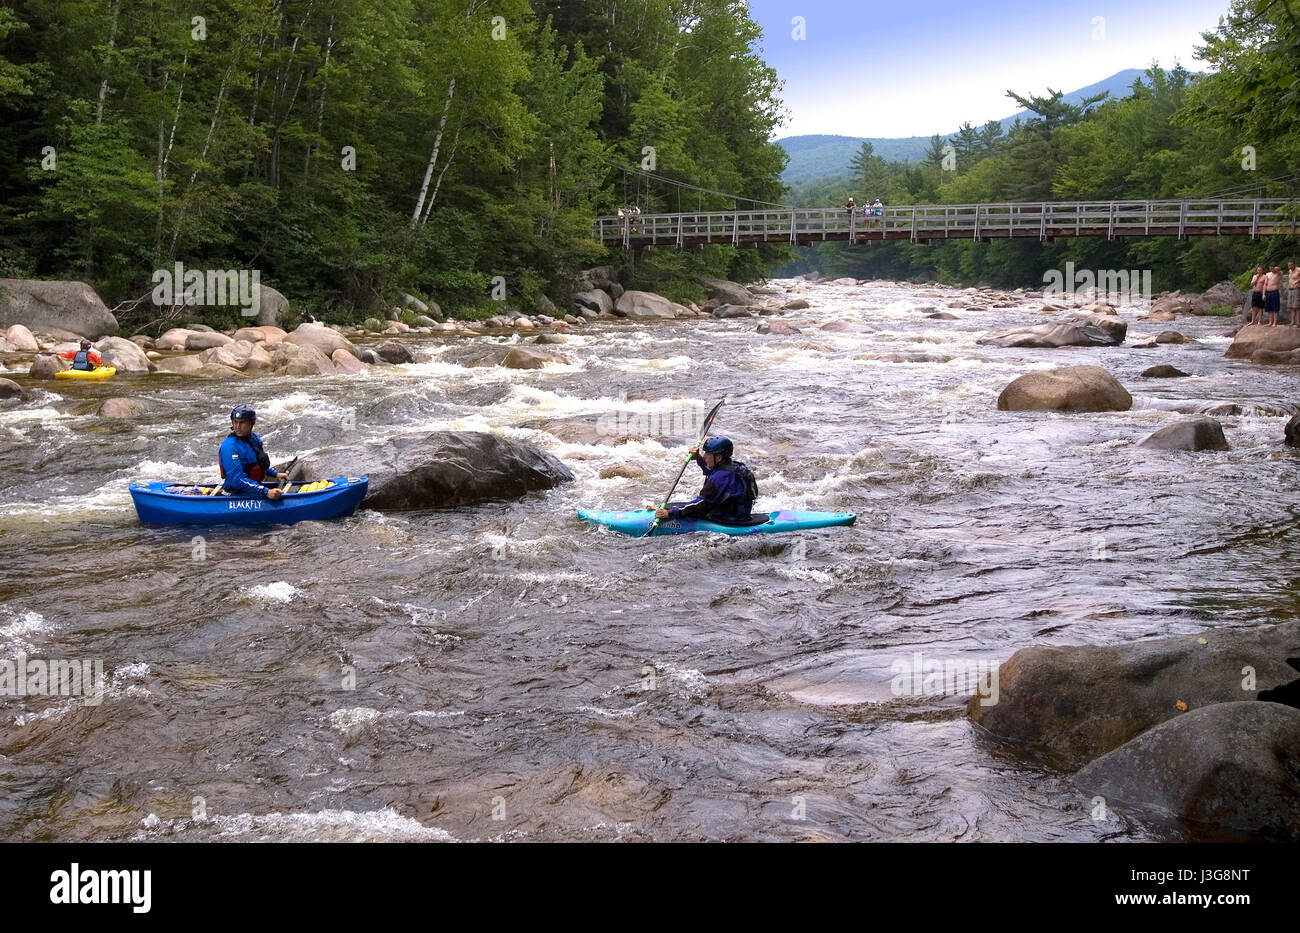 A raging river at Lincoln Woods - White Mountains National Forest, Lincoln, New Hampshire, USA Stock Photo